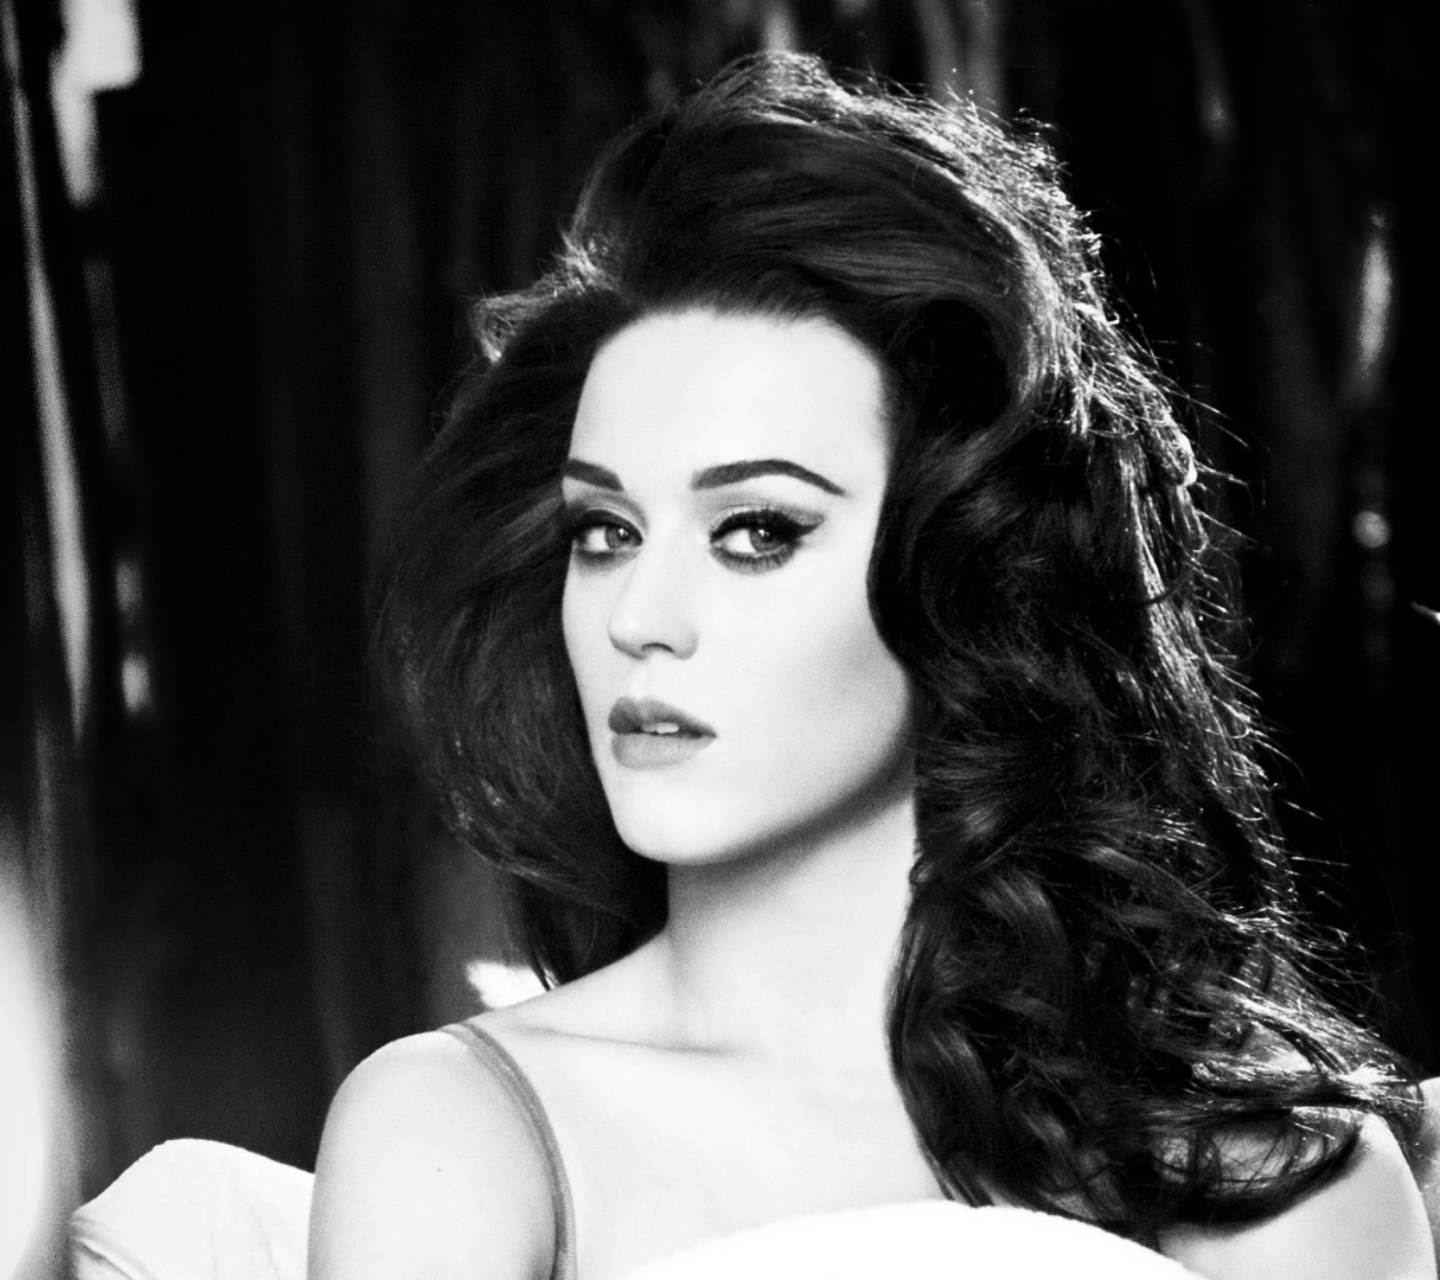 Katy Perry Black And White wallpaper 1440x1280